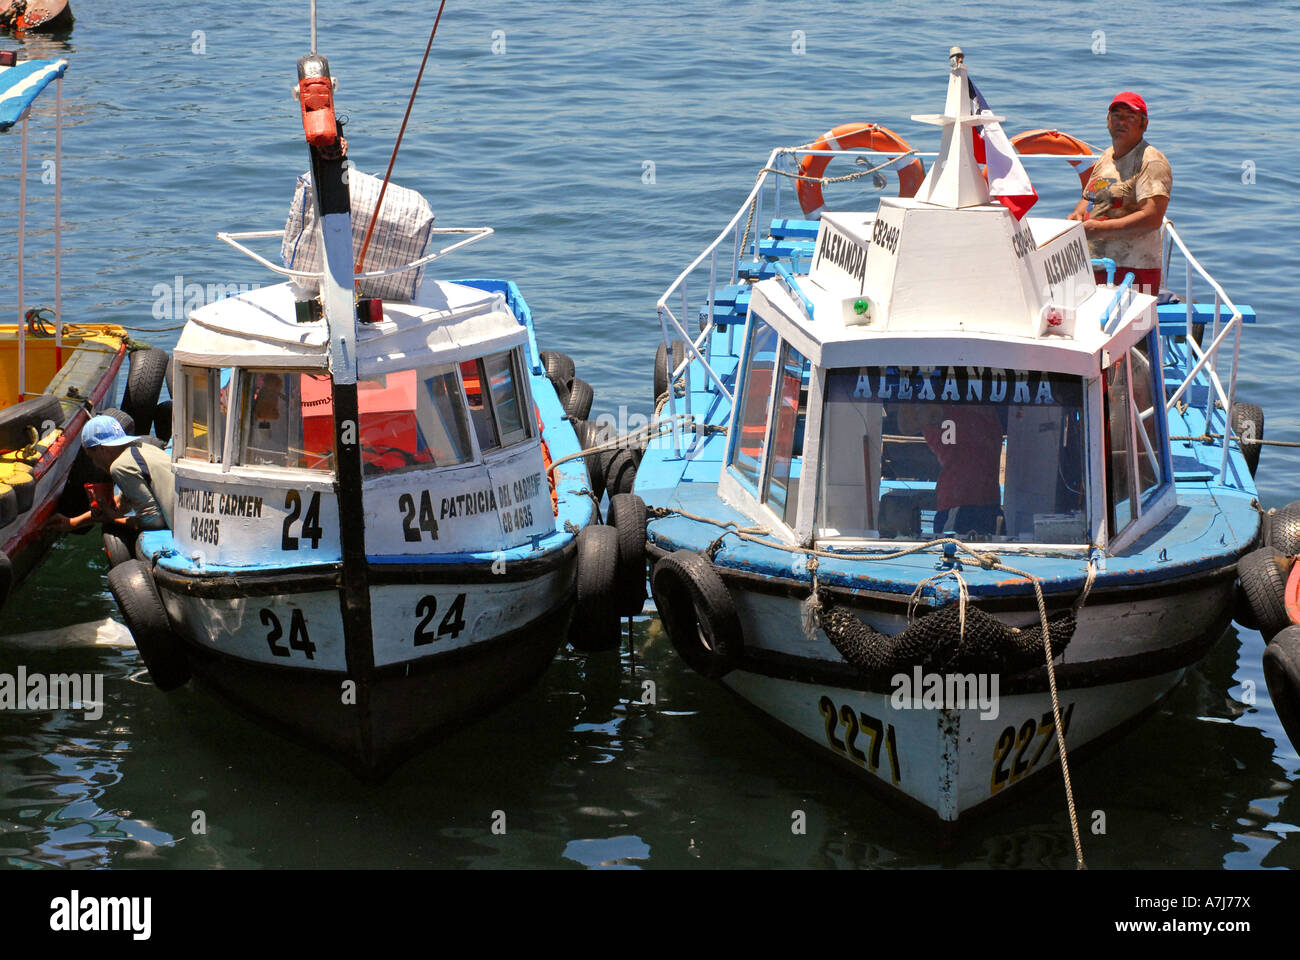 Fishing boats in the harbour of Valparaiso Chile Stock Photo